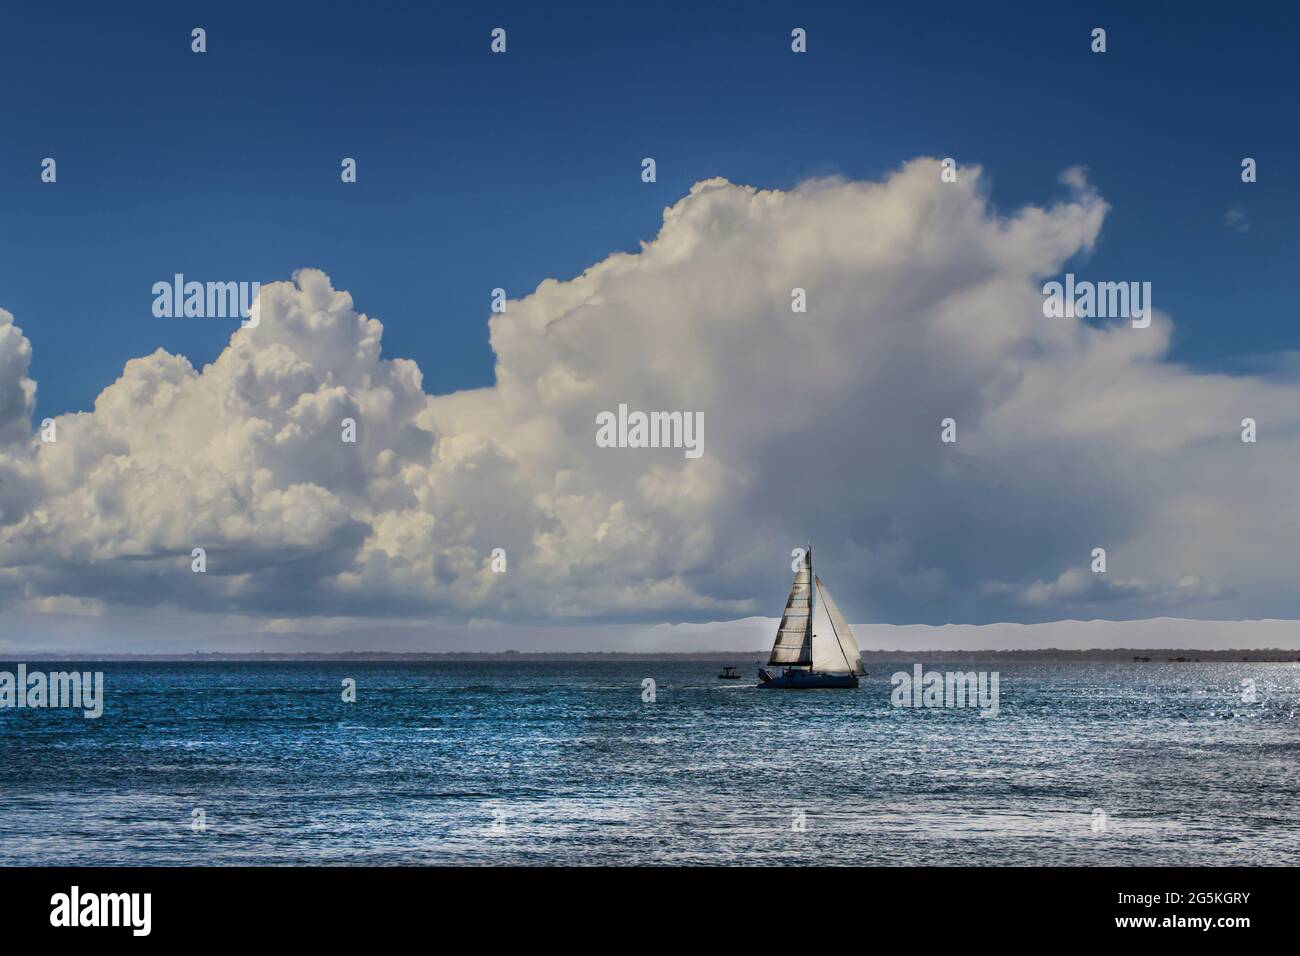 Sailboat out on water with far off coast visiable and huge cloud in blue sky Stock Photo